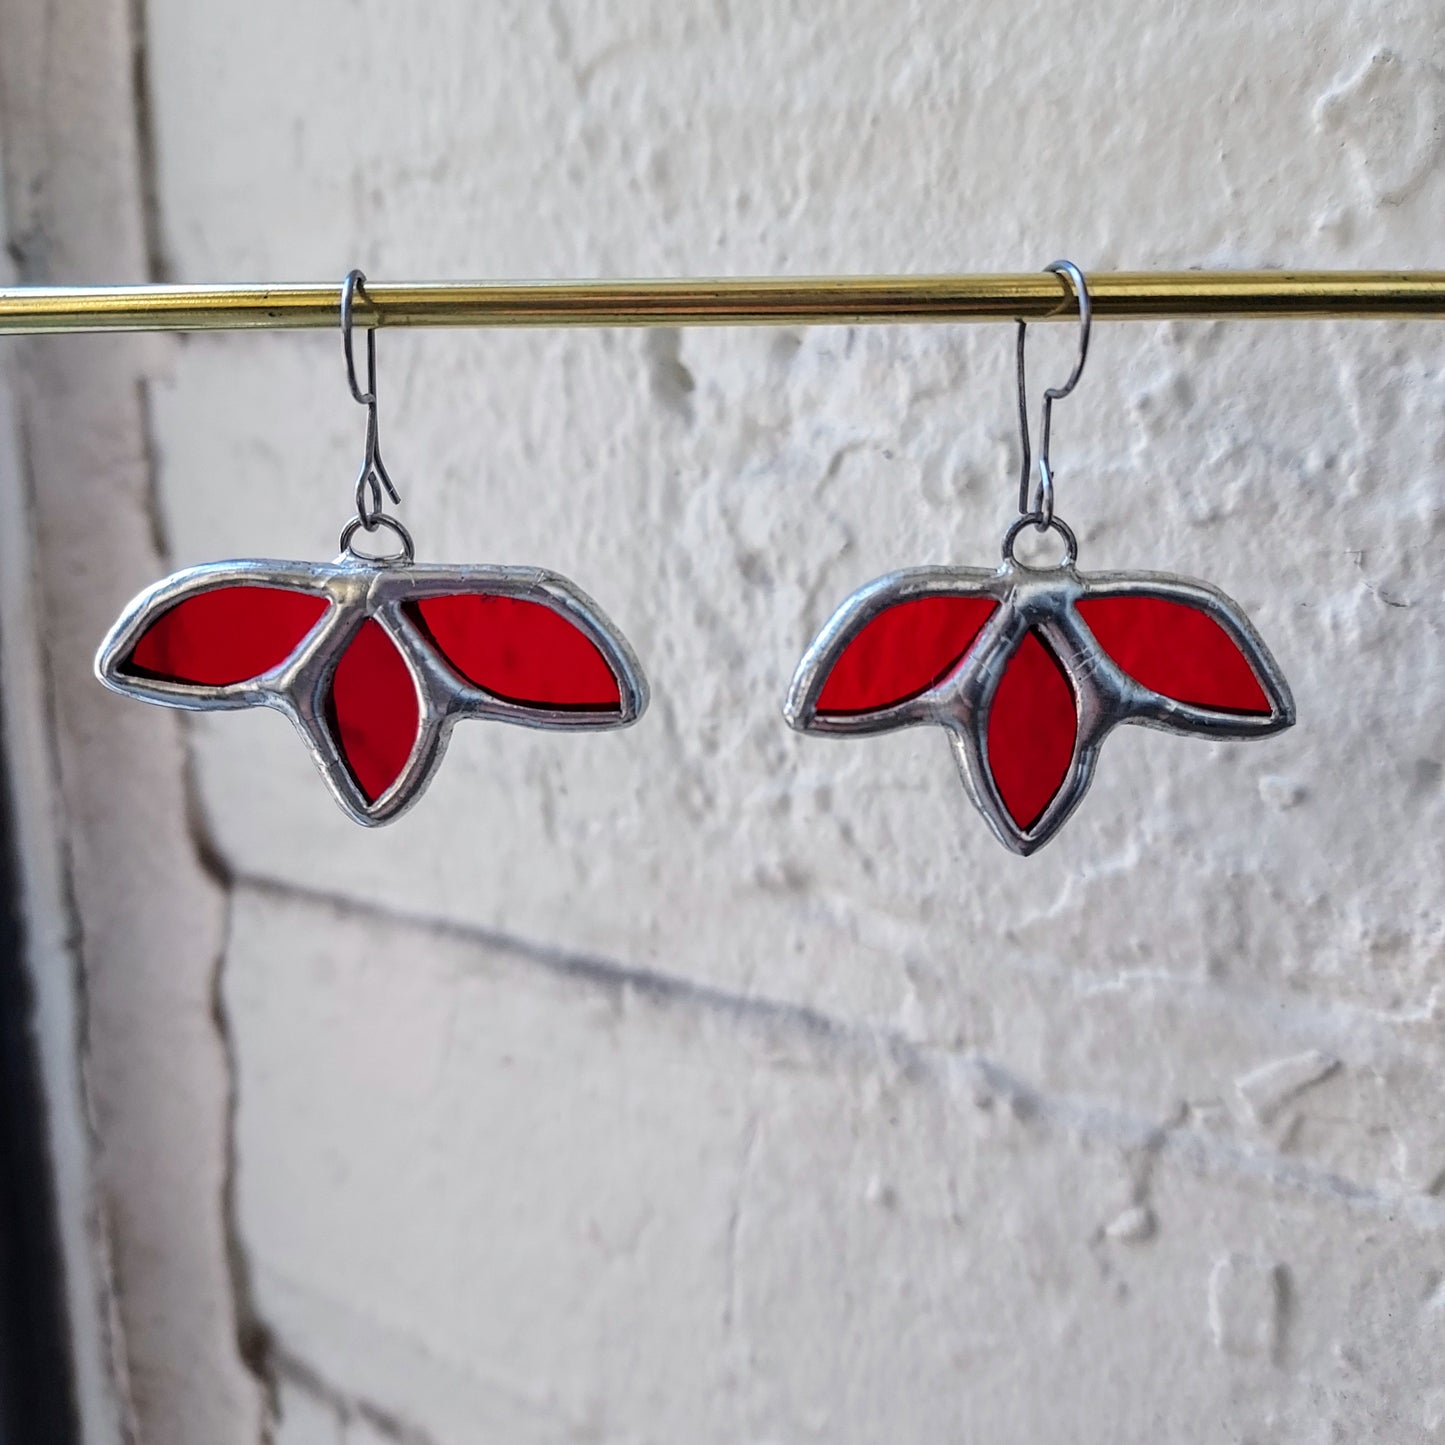 Blossom Stained Glass Earrings